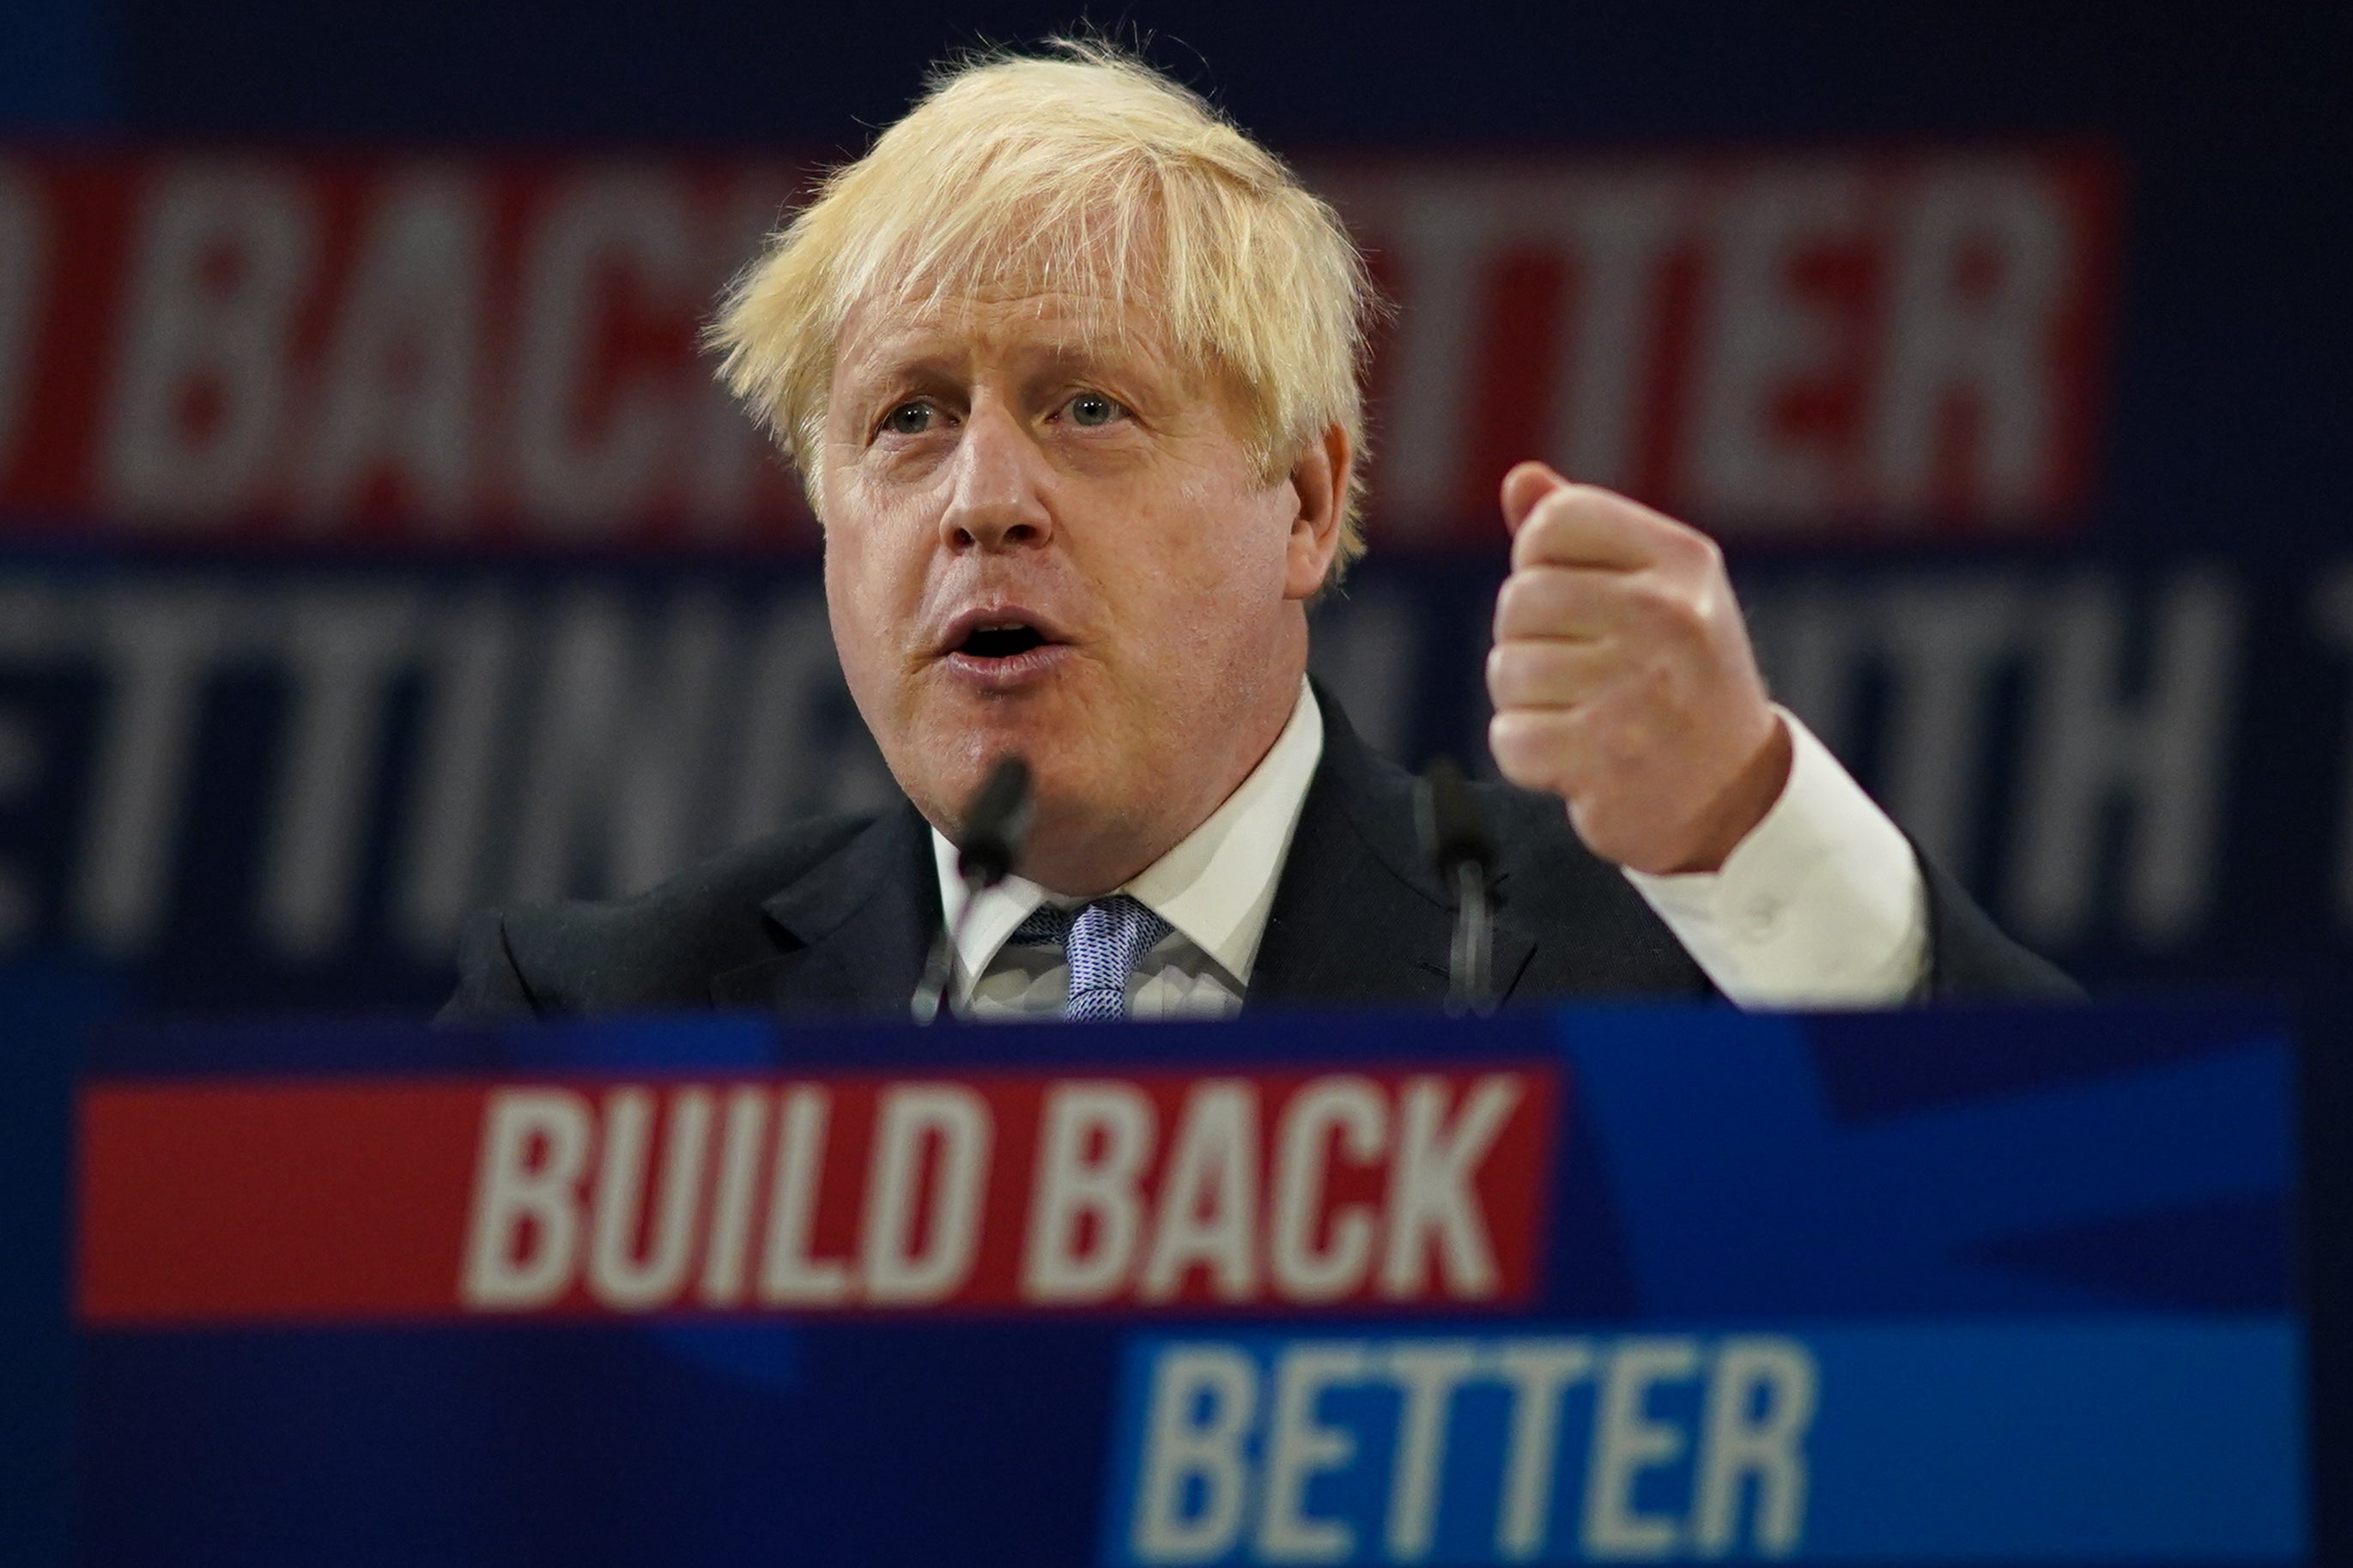 Boris Johnson defied calls from anti-poverty campaigners to keep universal credit uplift